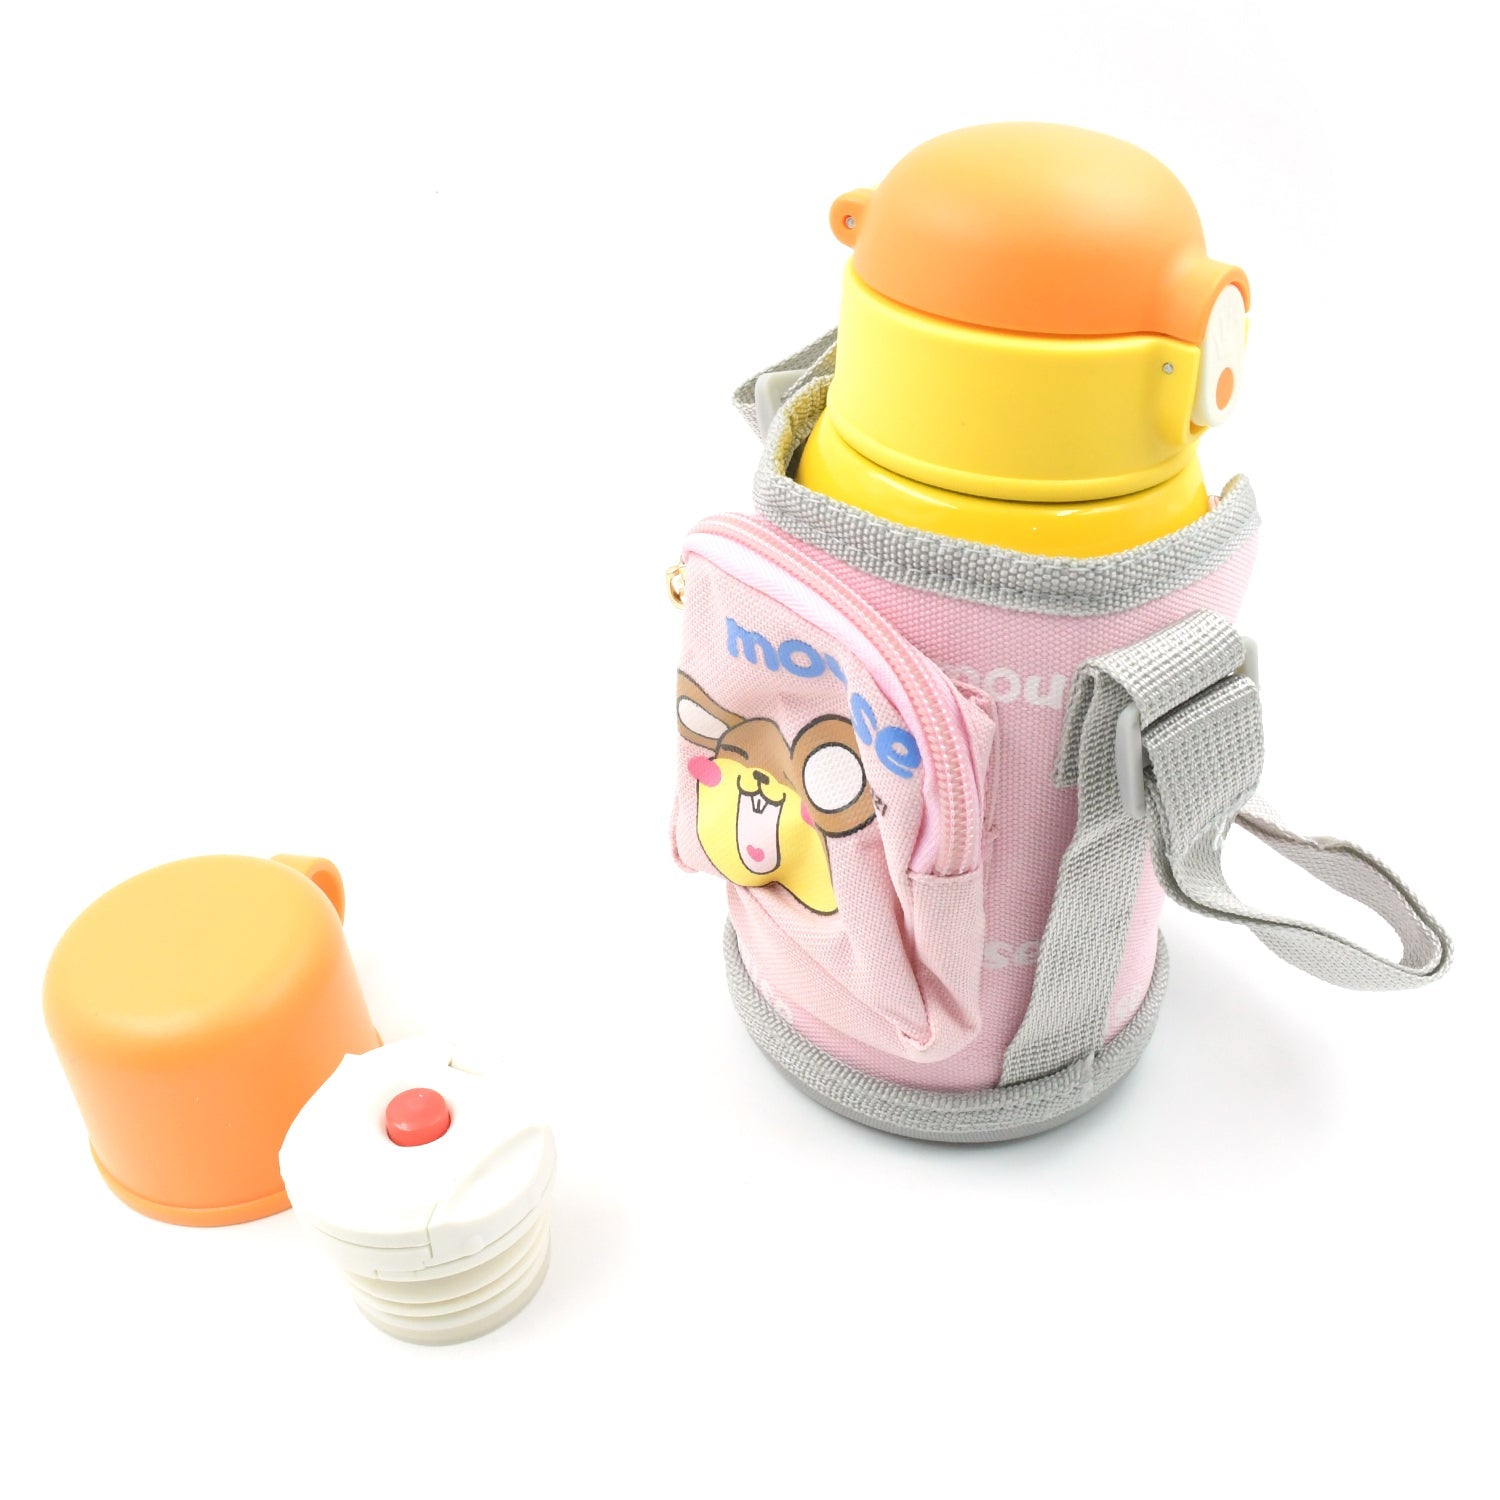 Love Baby Cute Animals Prints Kids Bottle Sipper for HOT N Cold Water, Milk, Juice with Bottle Cover, Cup, Zip Pocket & Straw to Keep Things Orange Green Pink Colors for Outdoor/ Office/Gym/School (600 ML)